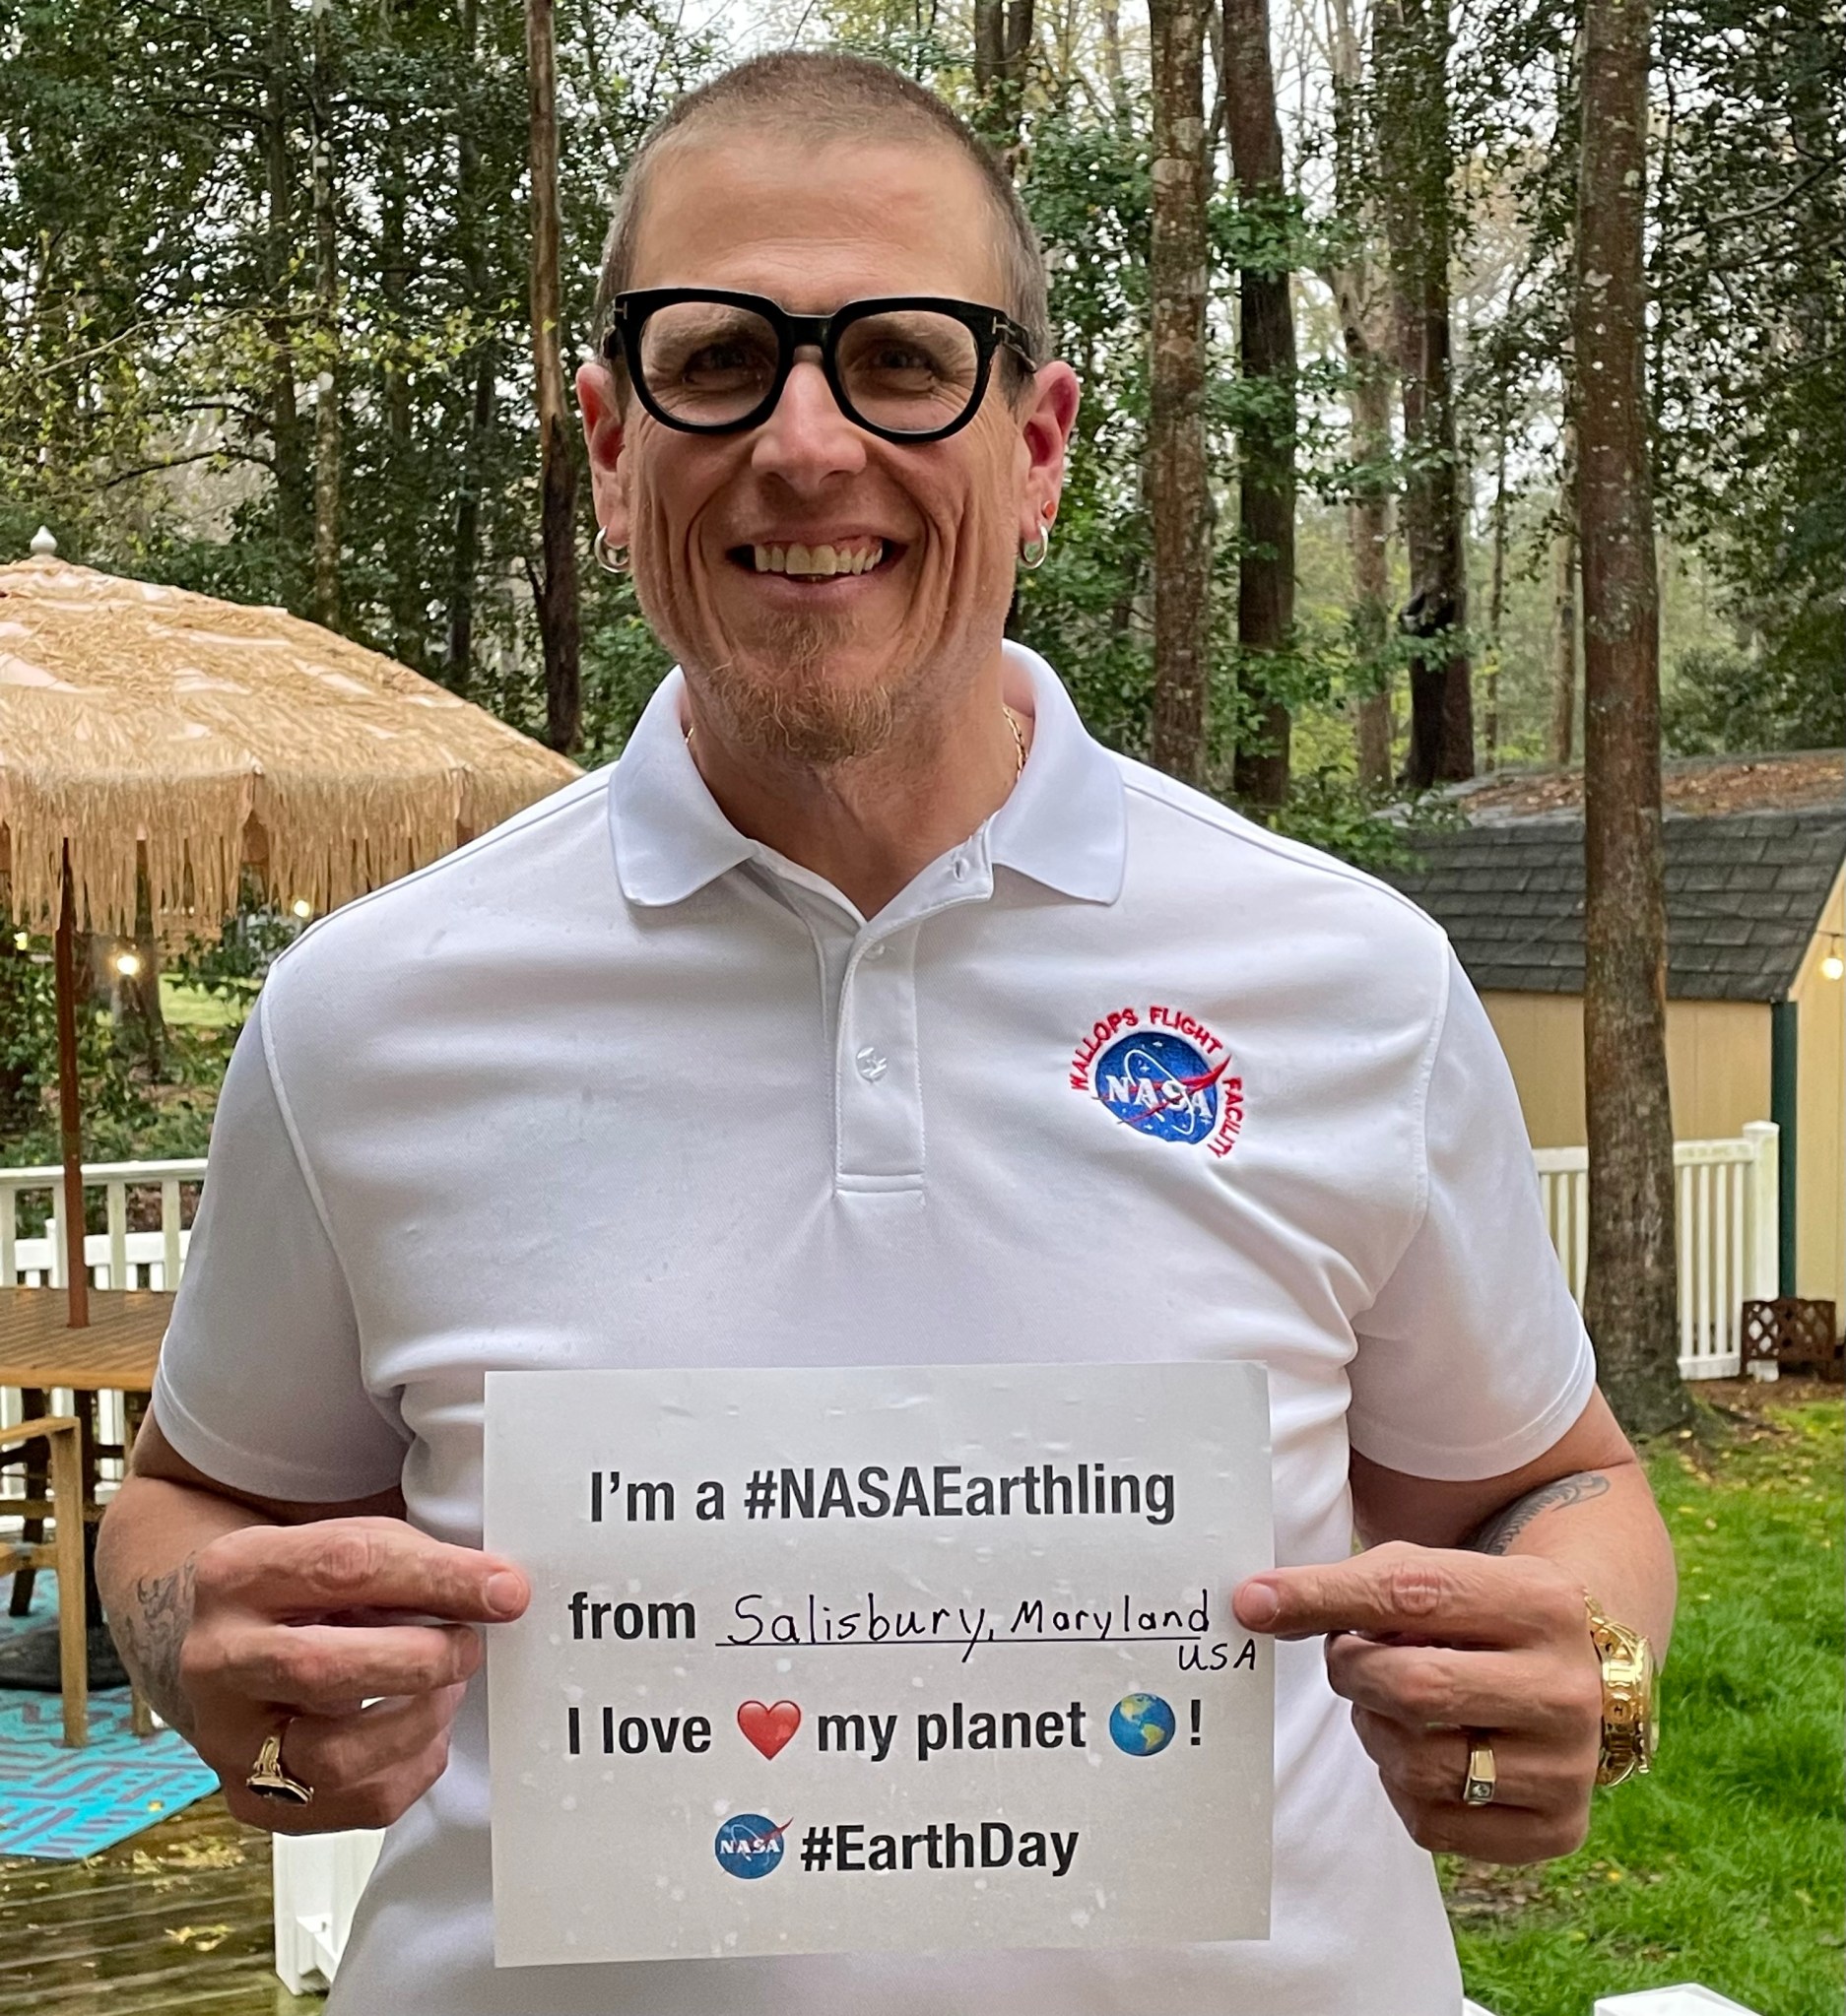 A man with buzzed hair, glasses, and earrings holds a paper sign outdoors. The sign says, “I’m a #NASAEarthling from Salisbury, Maryland, USA. I love my planet! NASA logo, #EarthDay” with a heart emoji, an Earth emoji, and the NASA meatball logo.